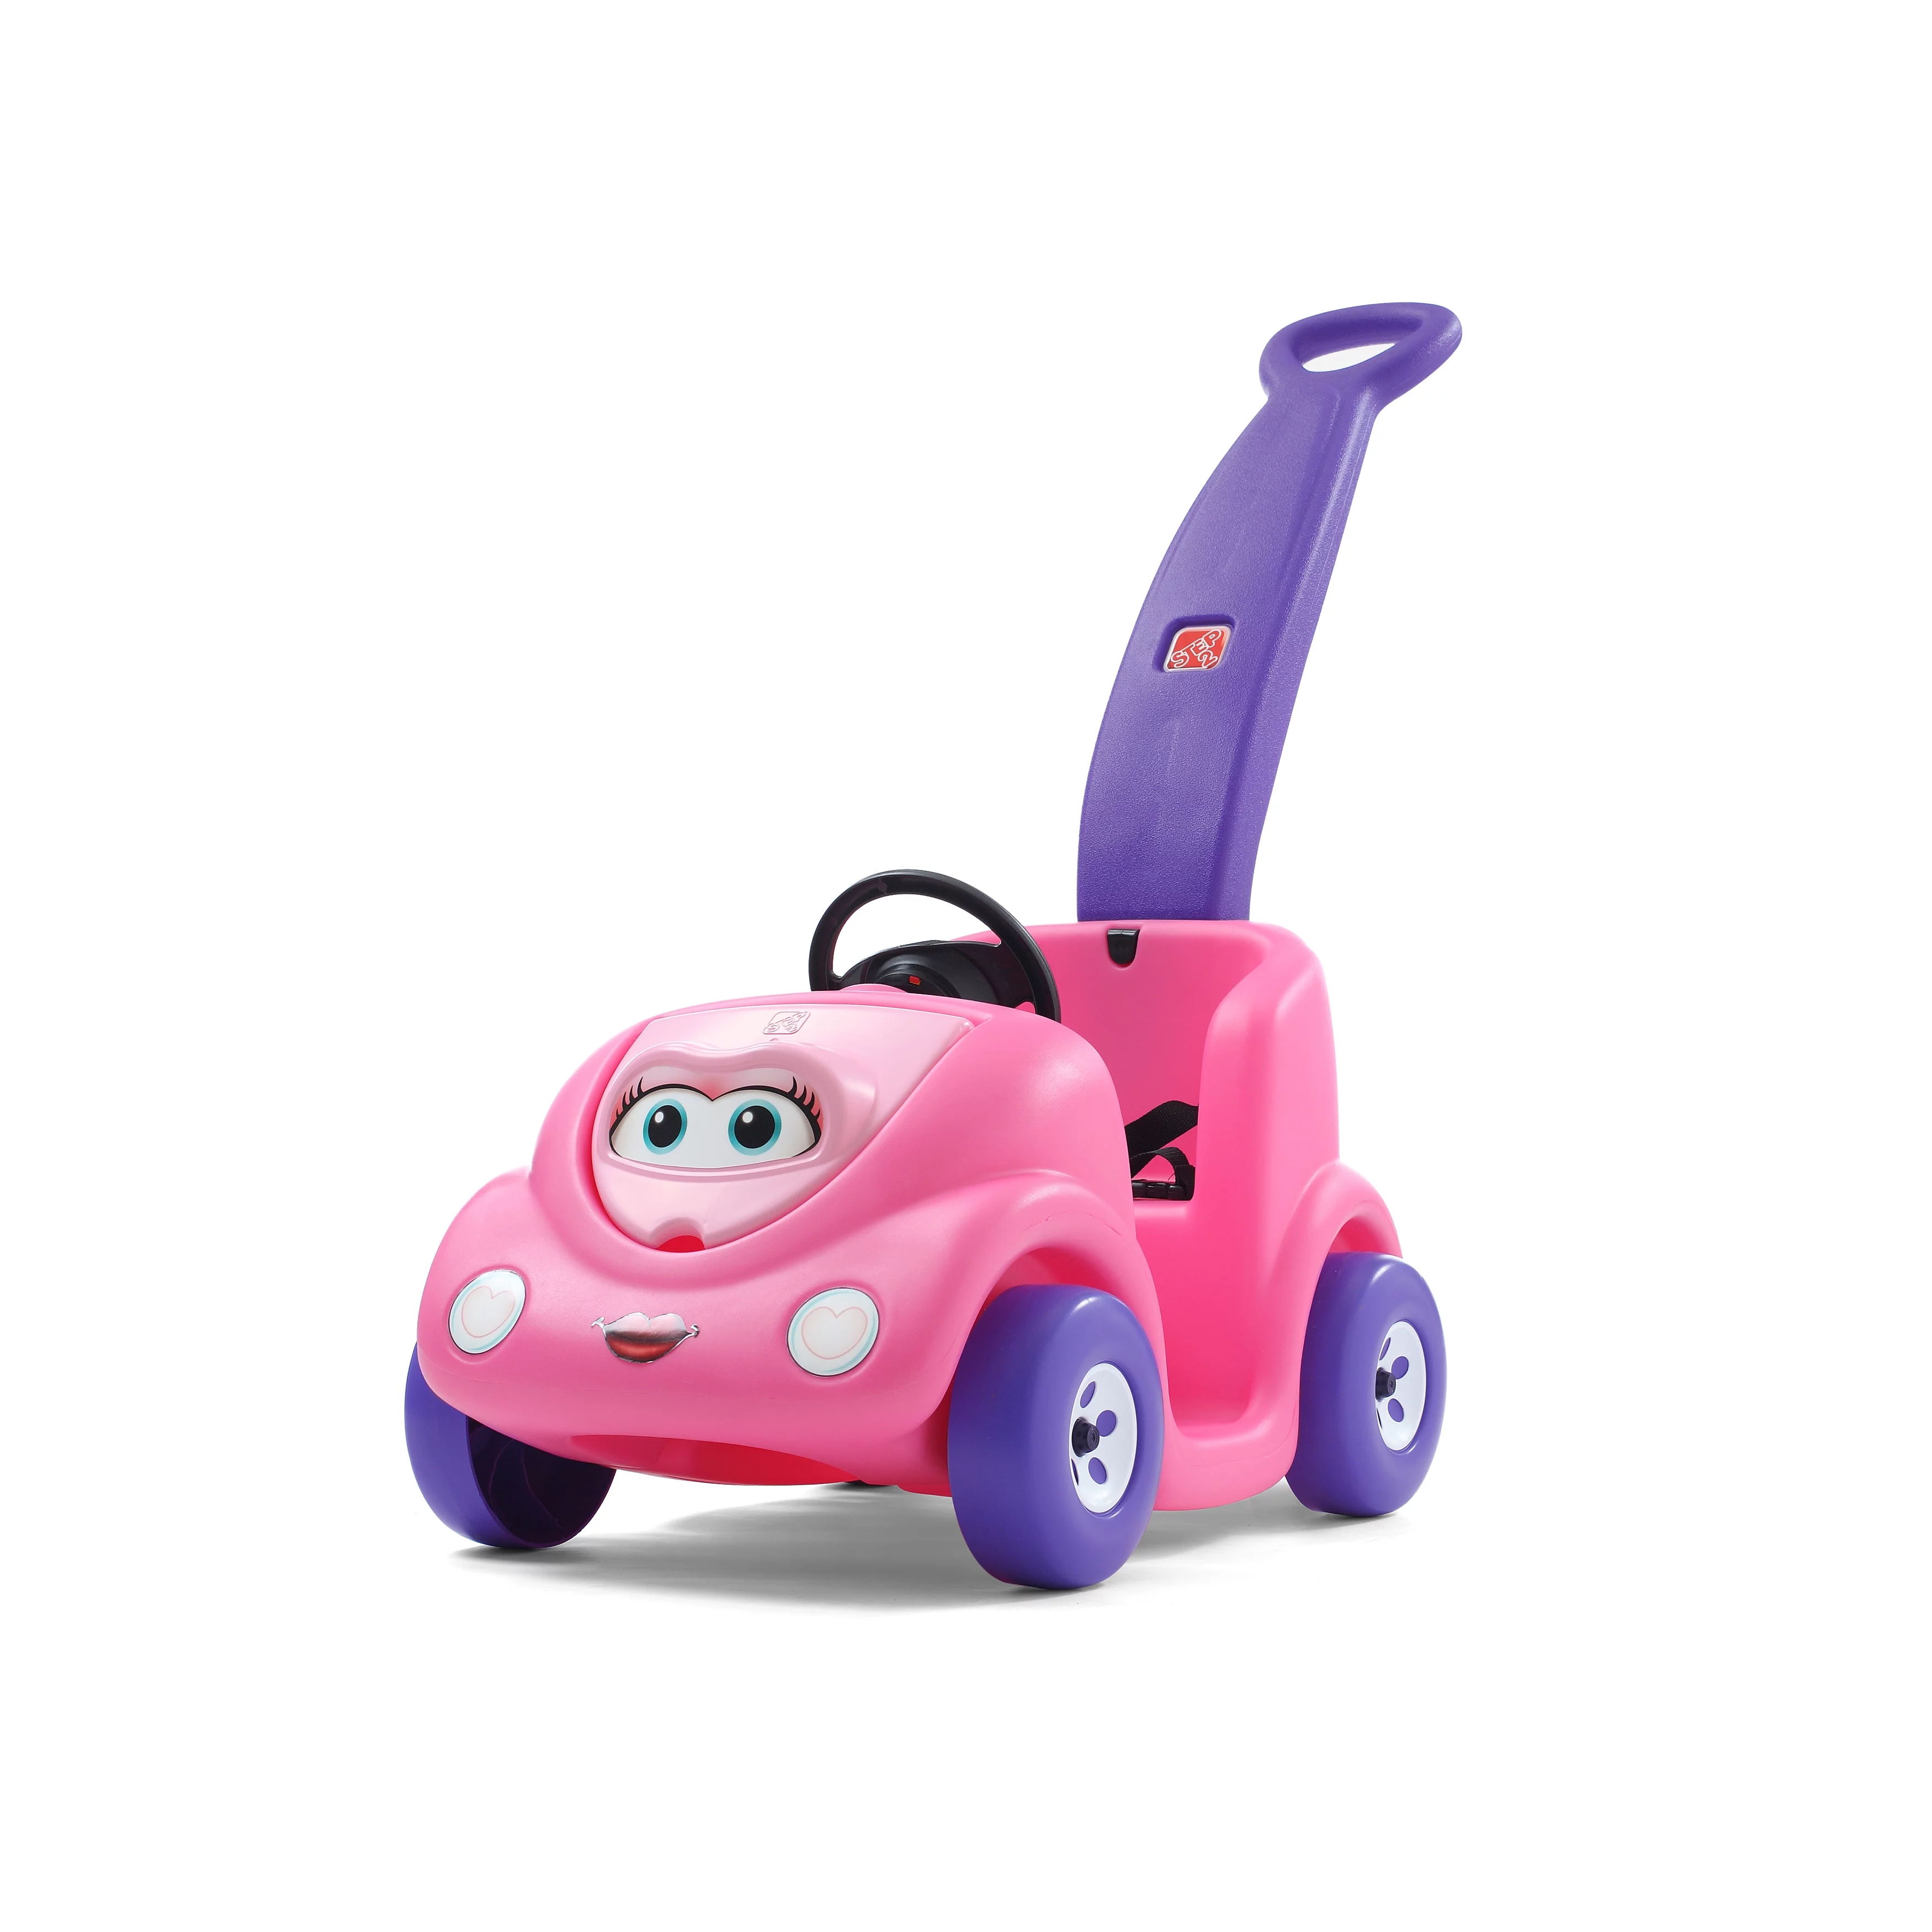 Step2 Push Around Buggy Pink 10th Anniversary Edition Kids Push Car and Ride On Toy for Toddler